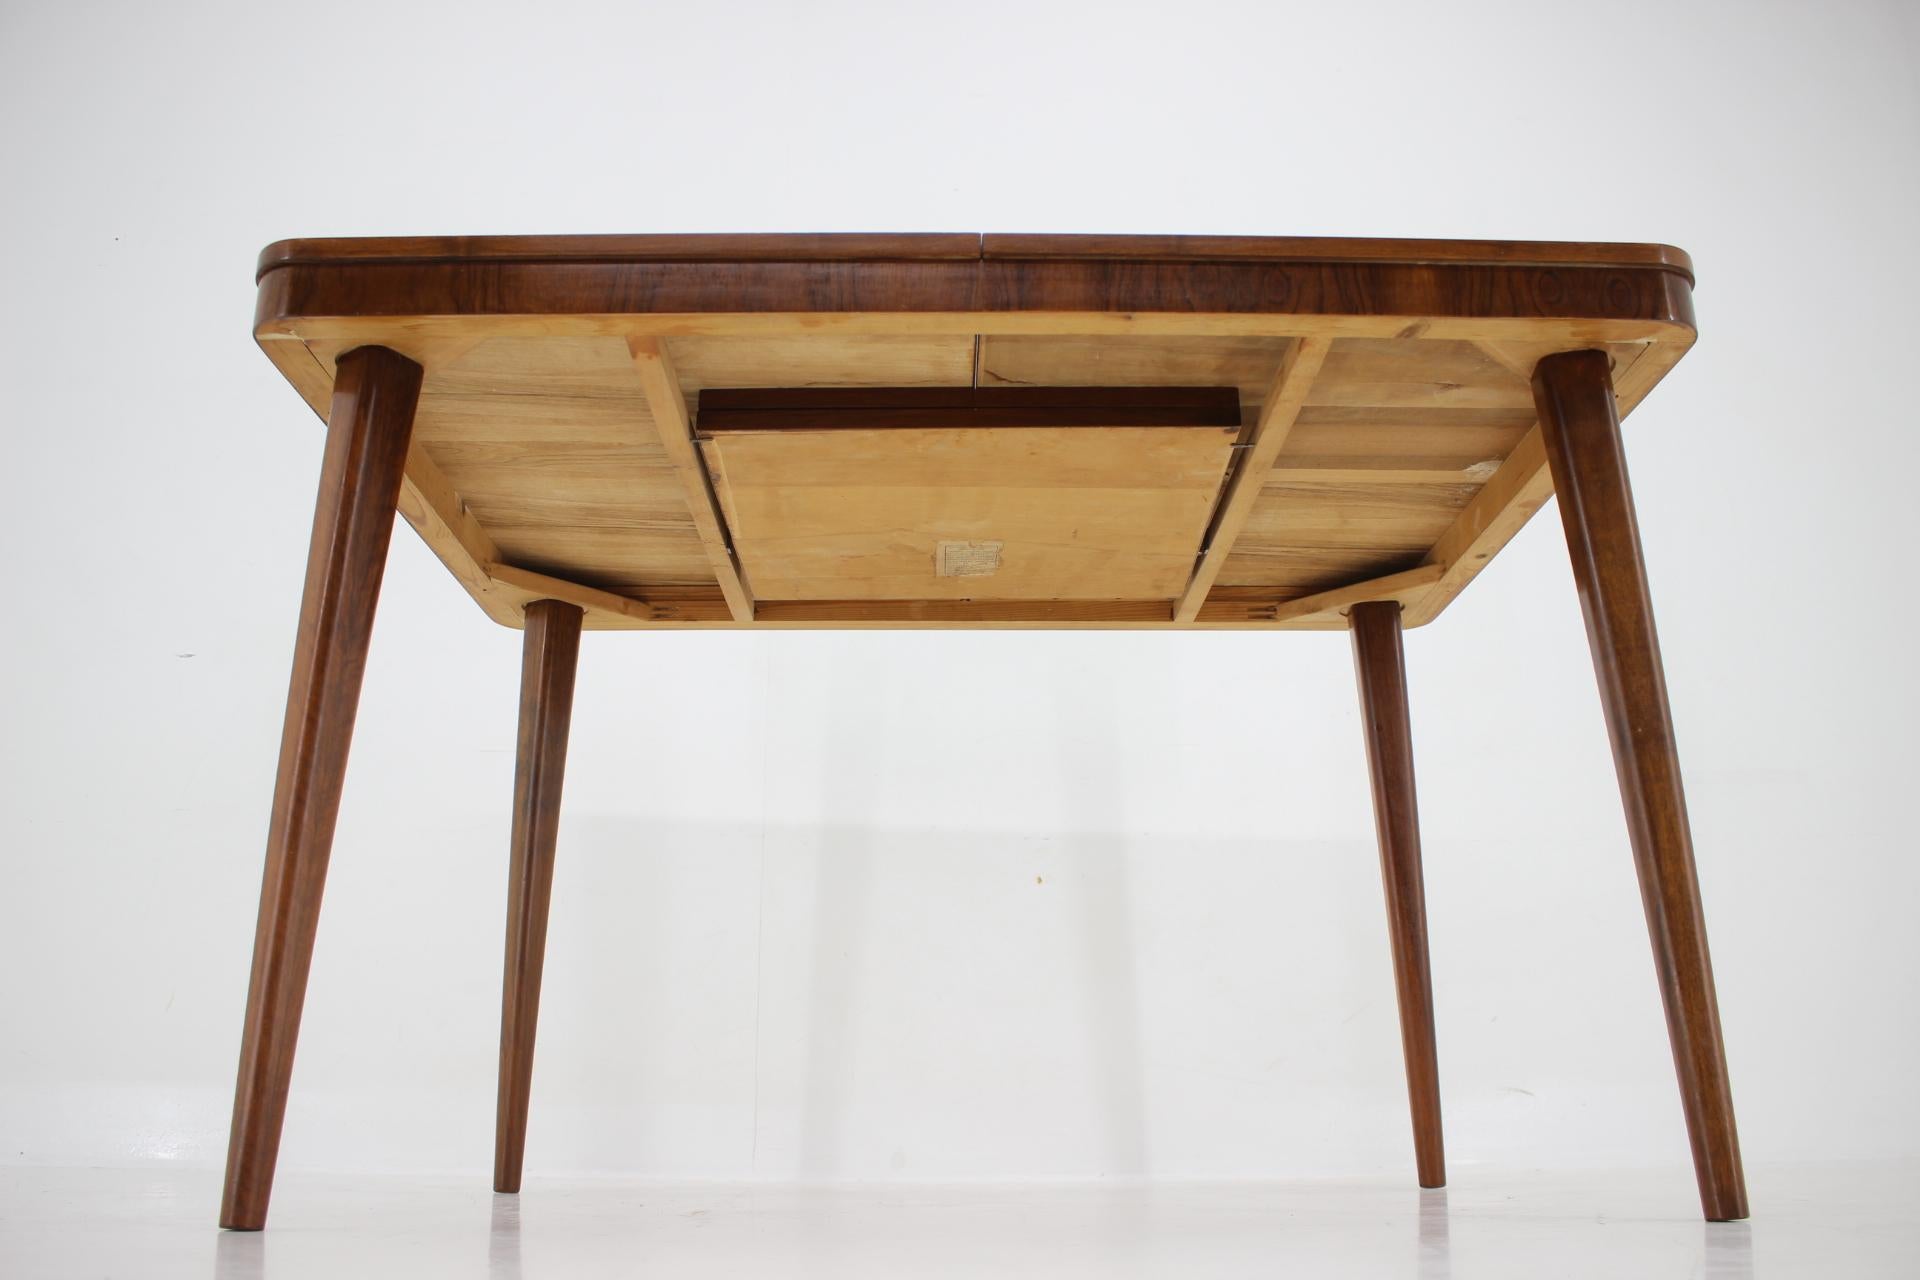 1950s Extendable Dining Table in Walnut by UP zavody, Czechoslovakia For Sale 2